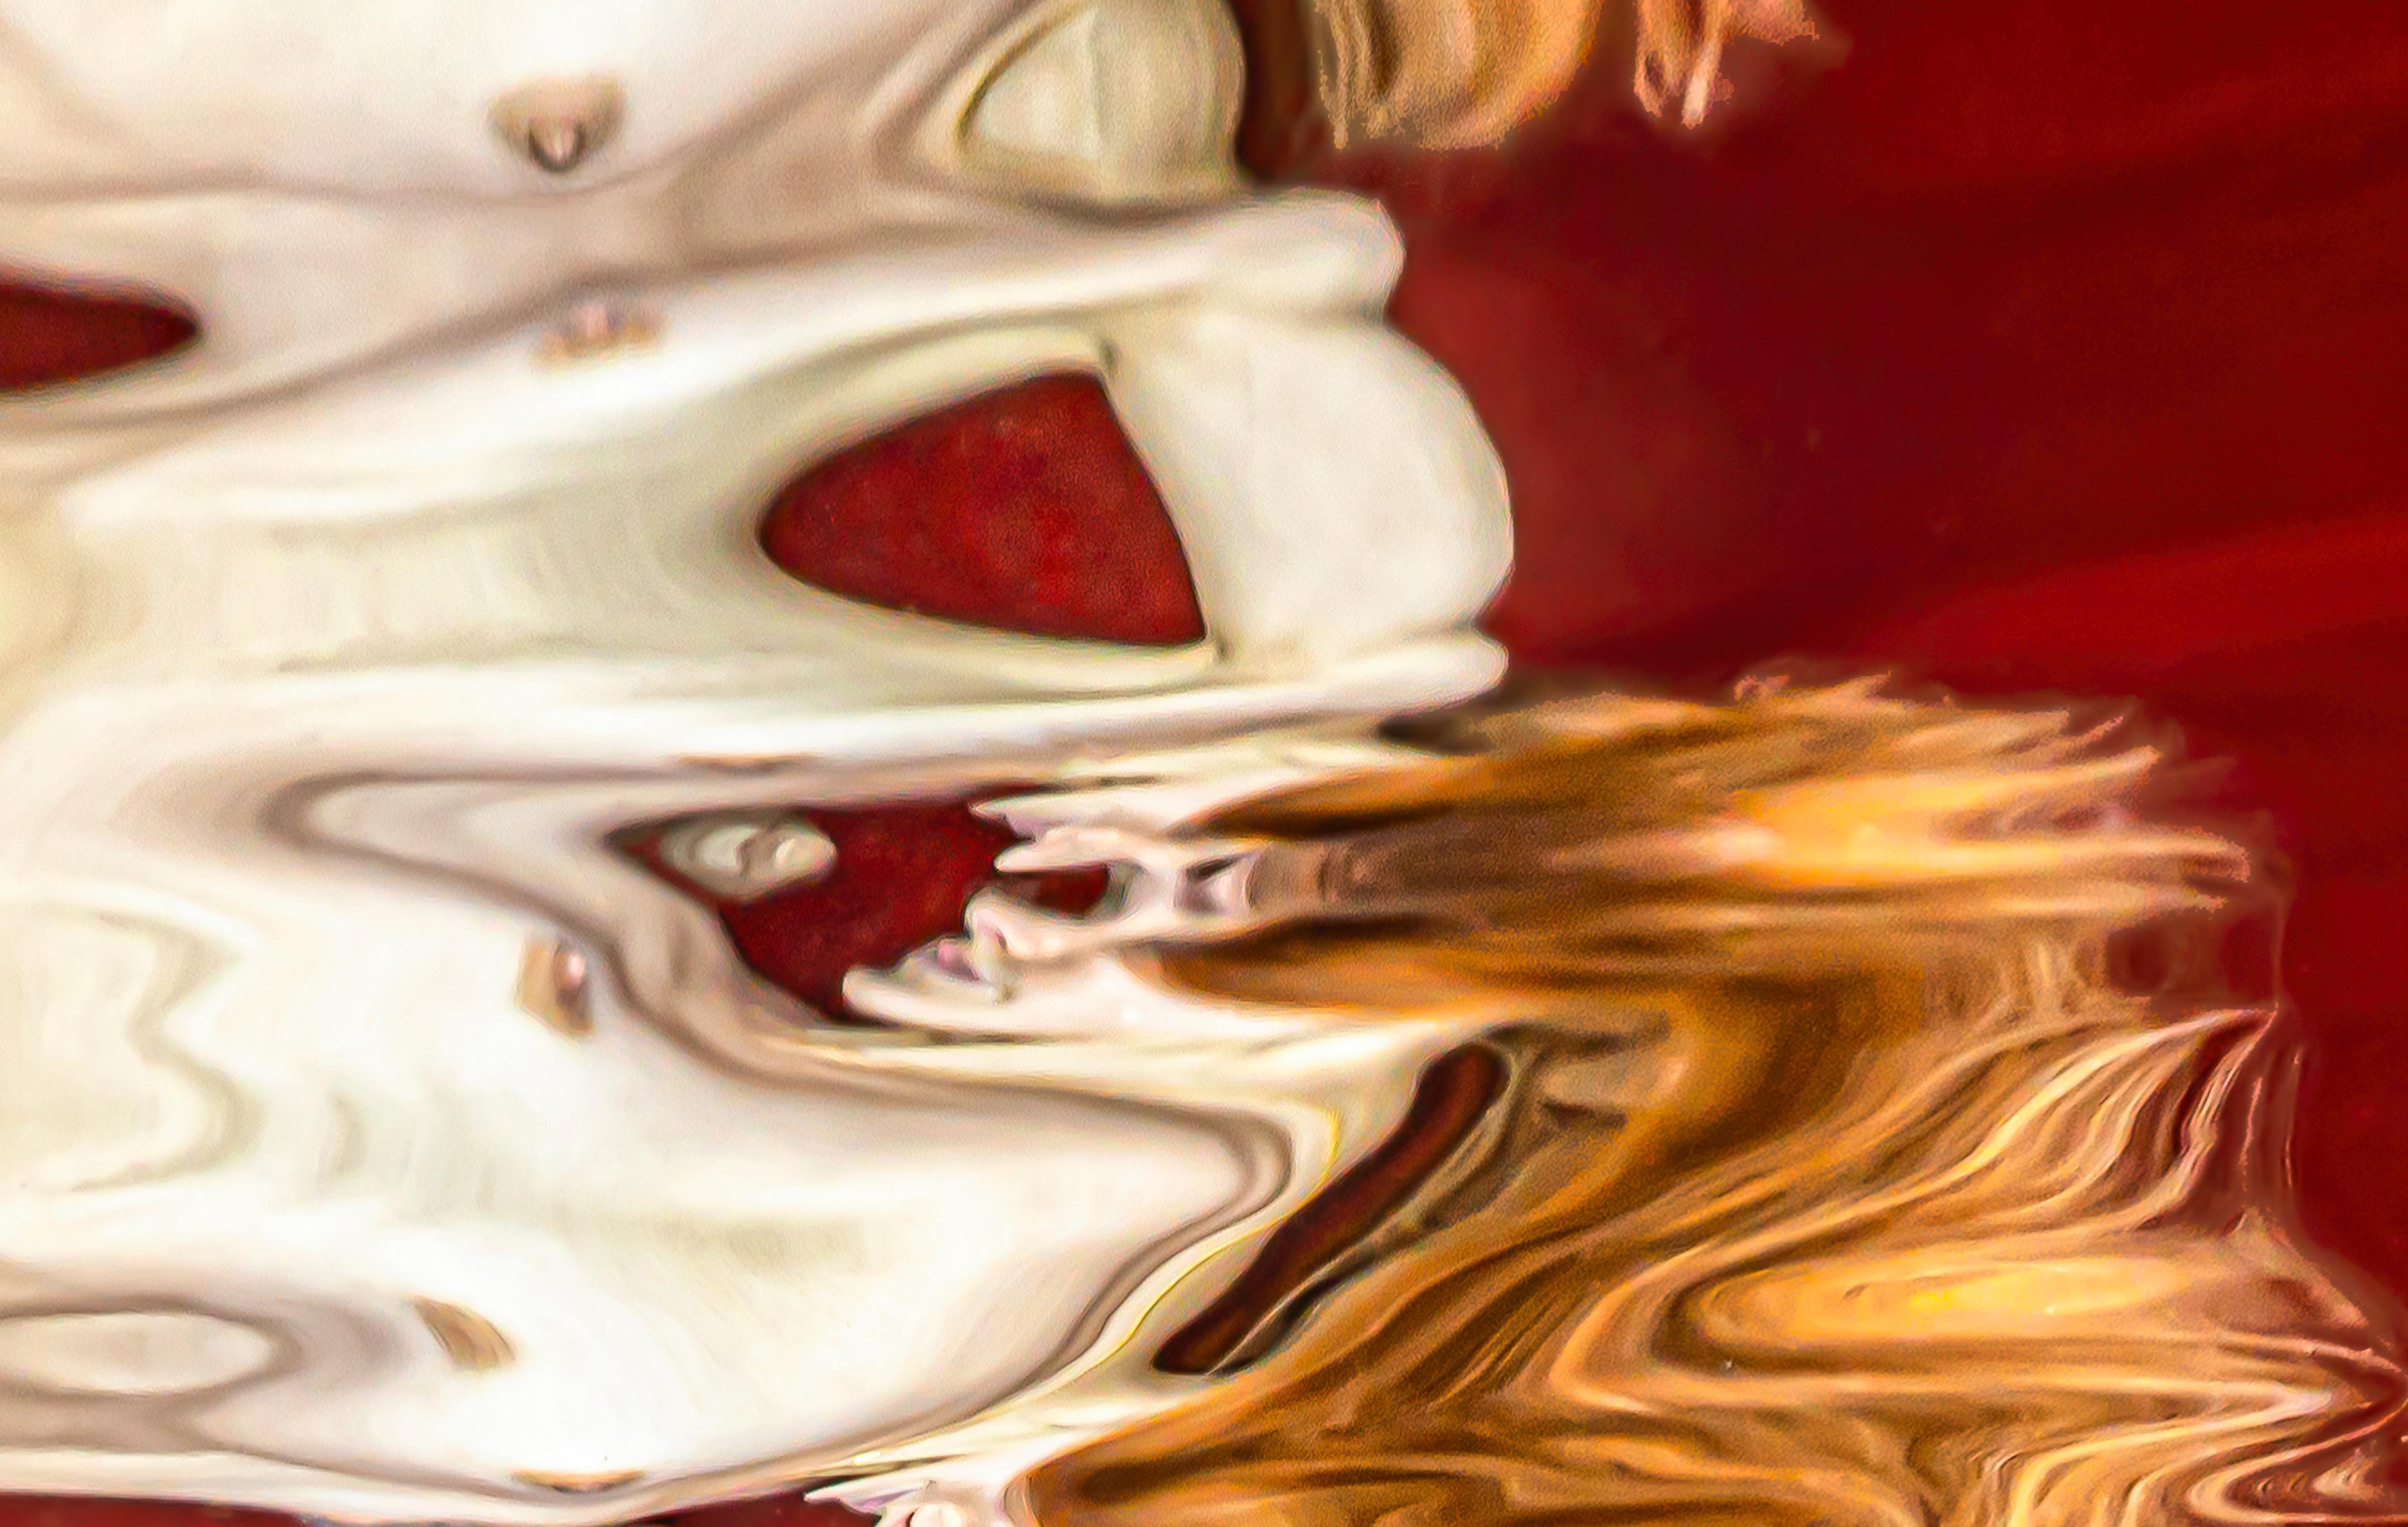 Spark  - underwater nude photograph from series REFLECTIONS - acrylic  - Photograph by Alex Sher